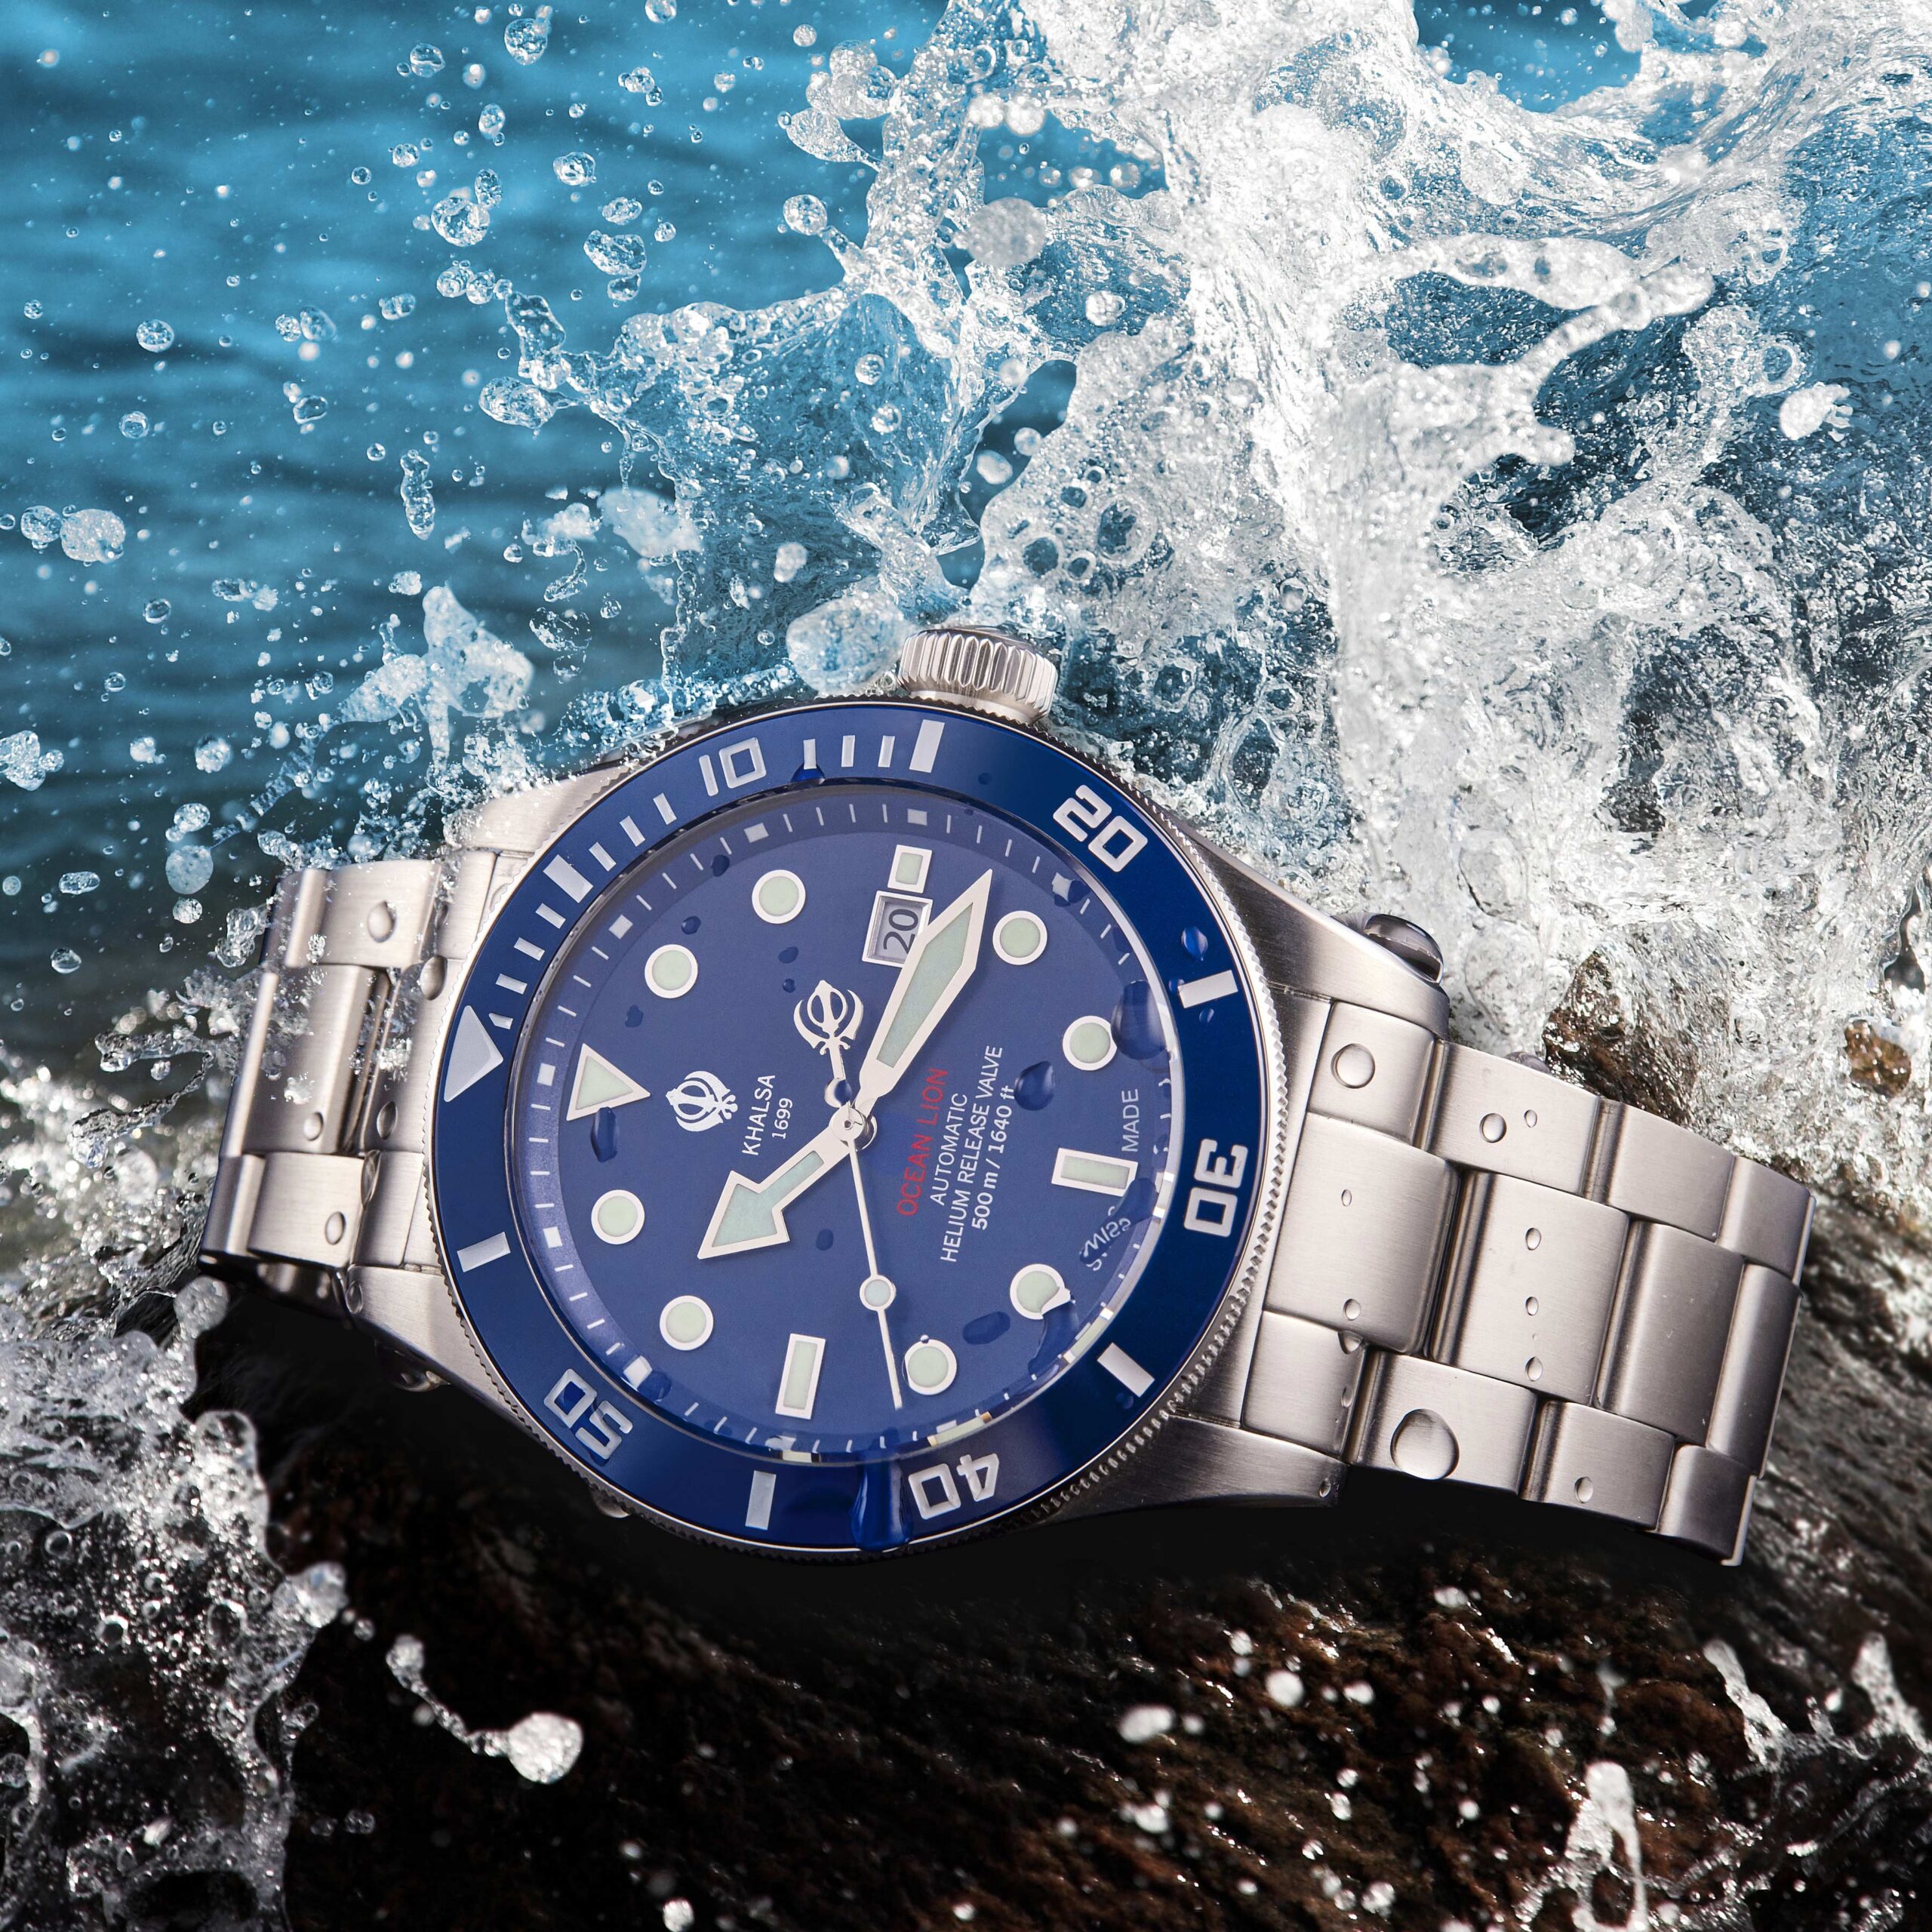 Luxury Swiss made watch for diving placed on rock with water splashing over it